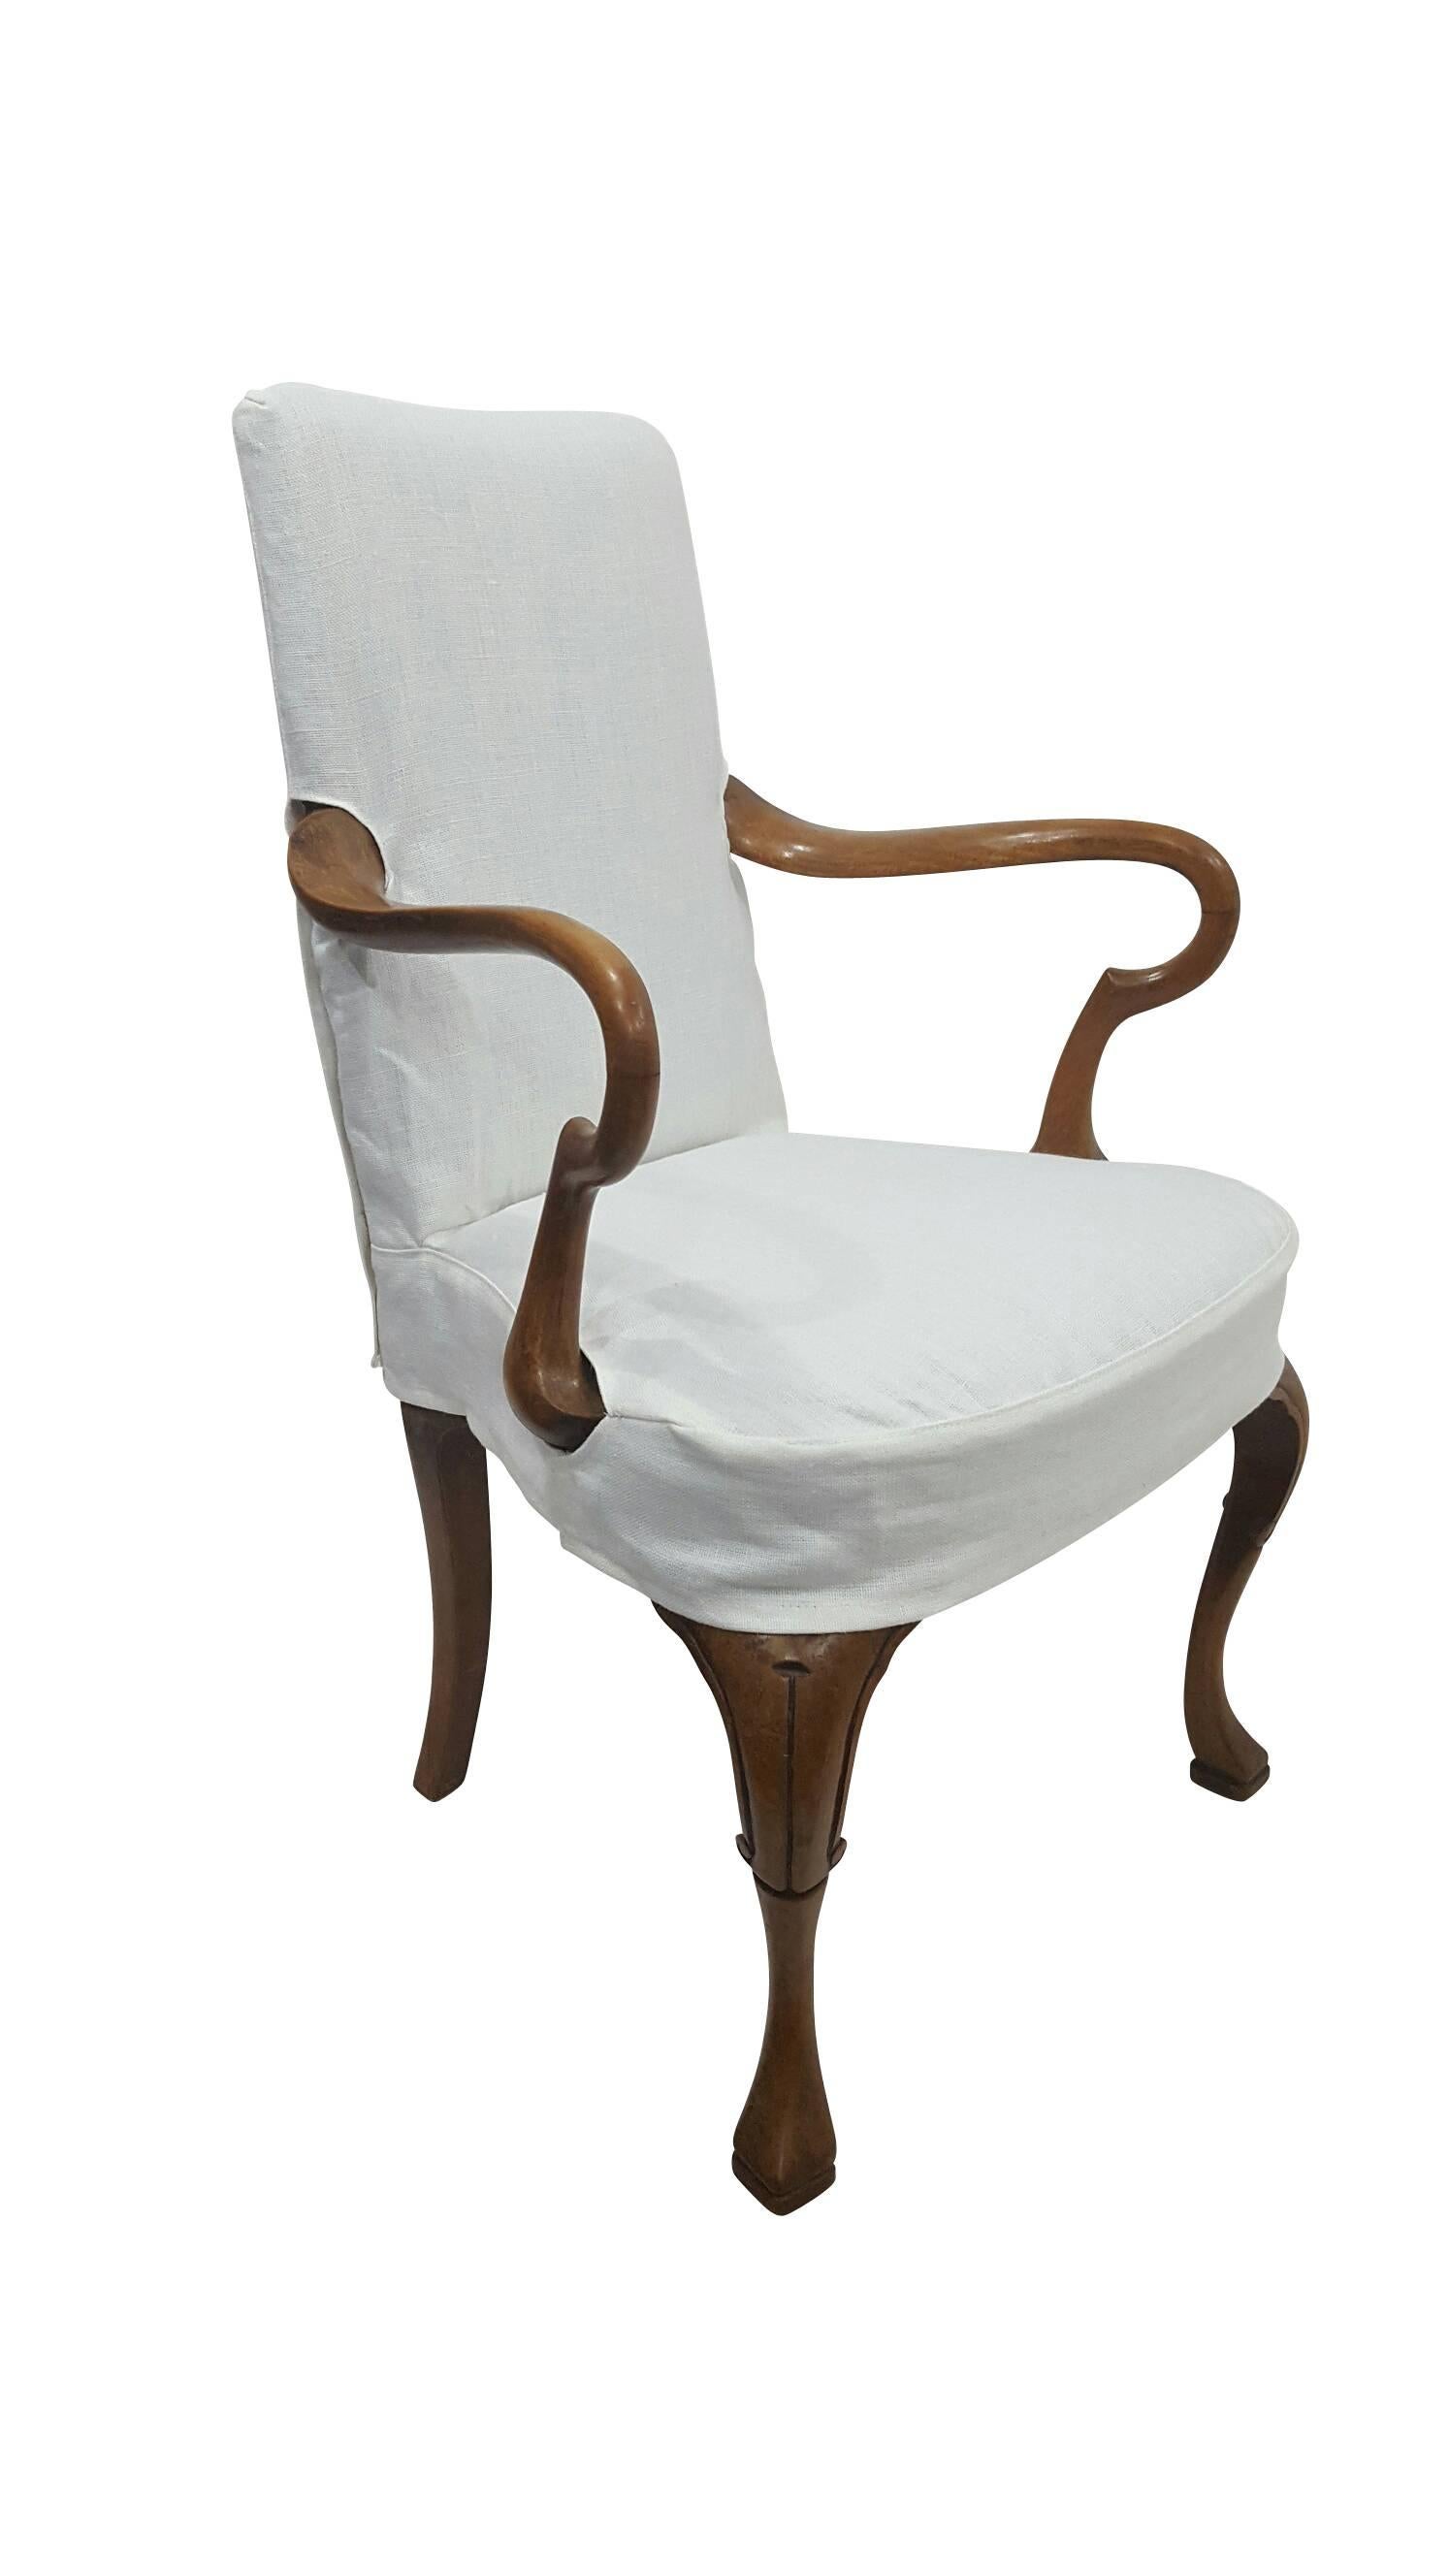 Gorgeous 18th century antique Queen Anne chair,
circa 1870, France
Preserved in its original fabric
Slipcover in optic white linen.